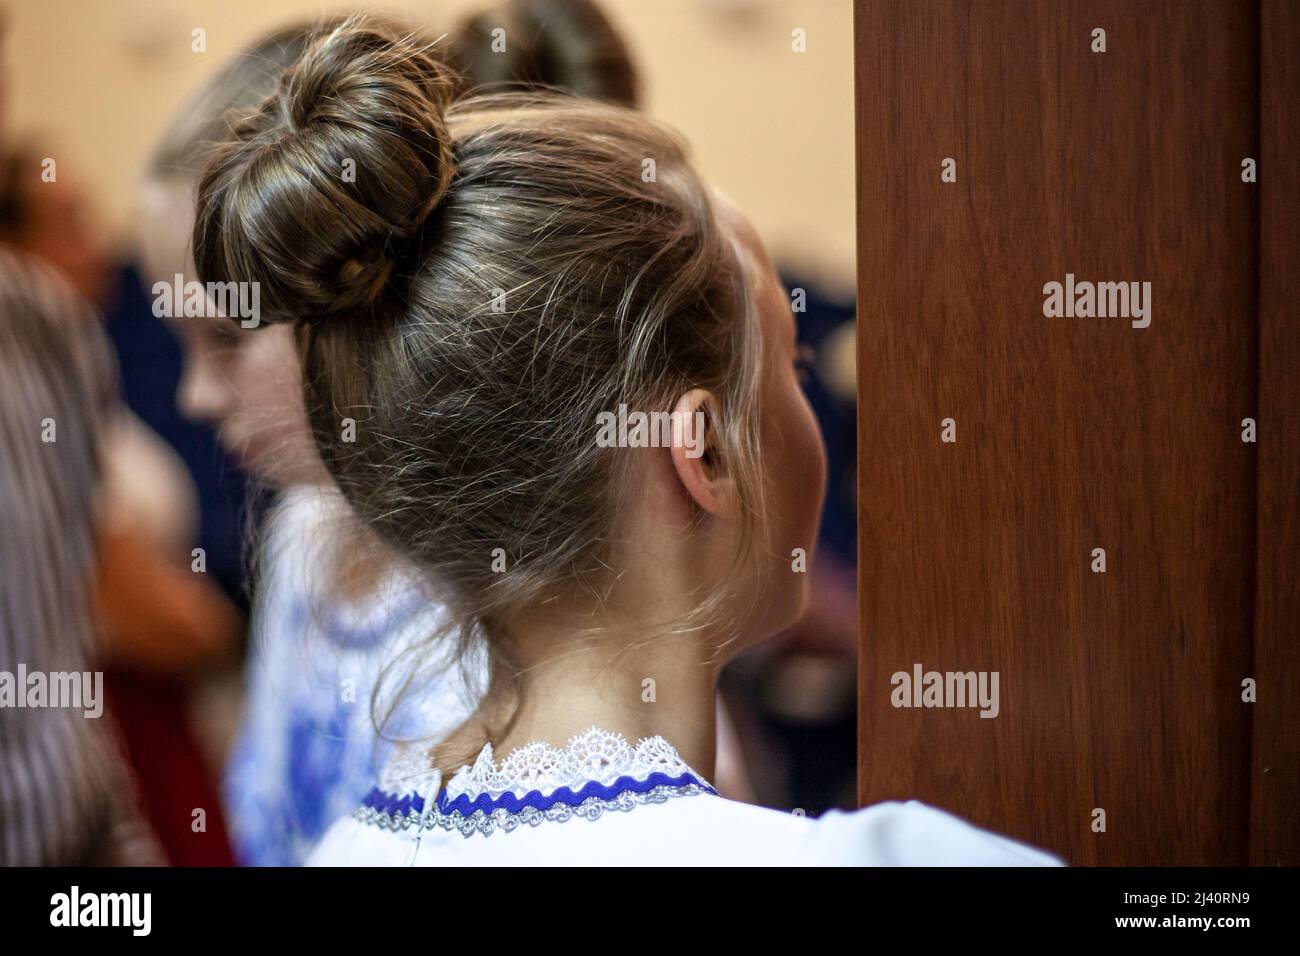 Hairstyle hair tied in a bun. The girl is looking out the door. A teenager with a classic haircut. Human head rear view. Stock Photo